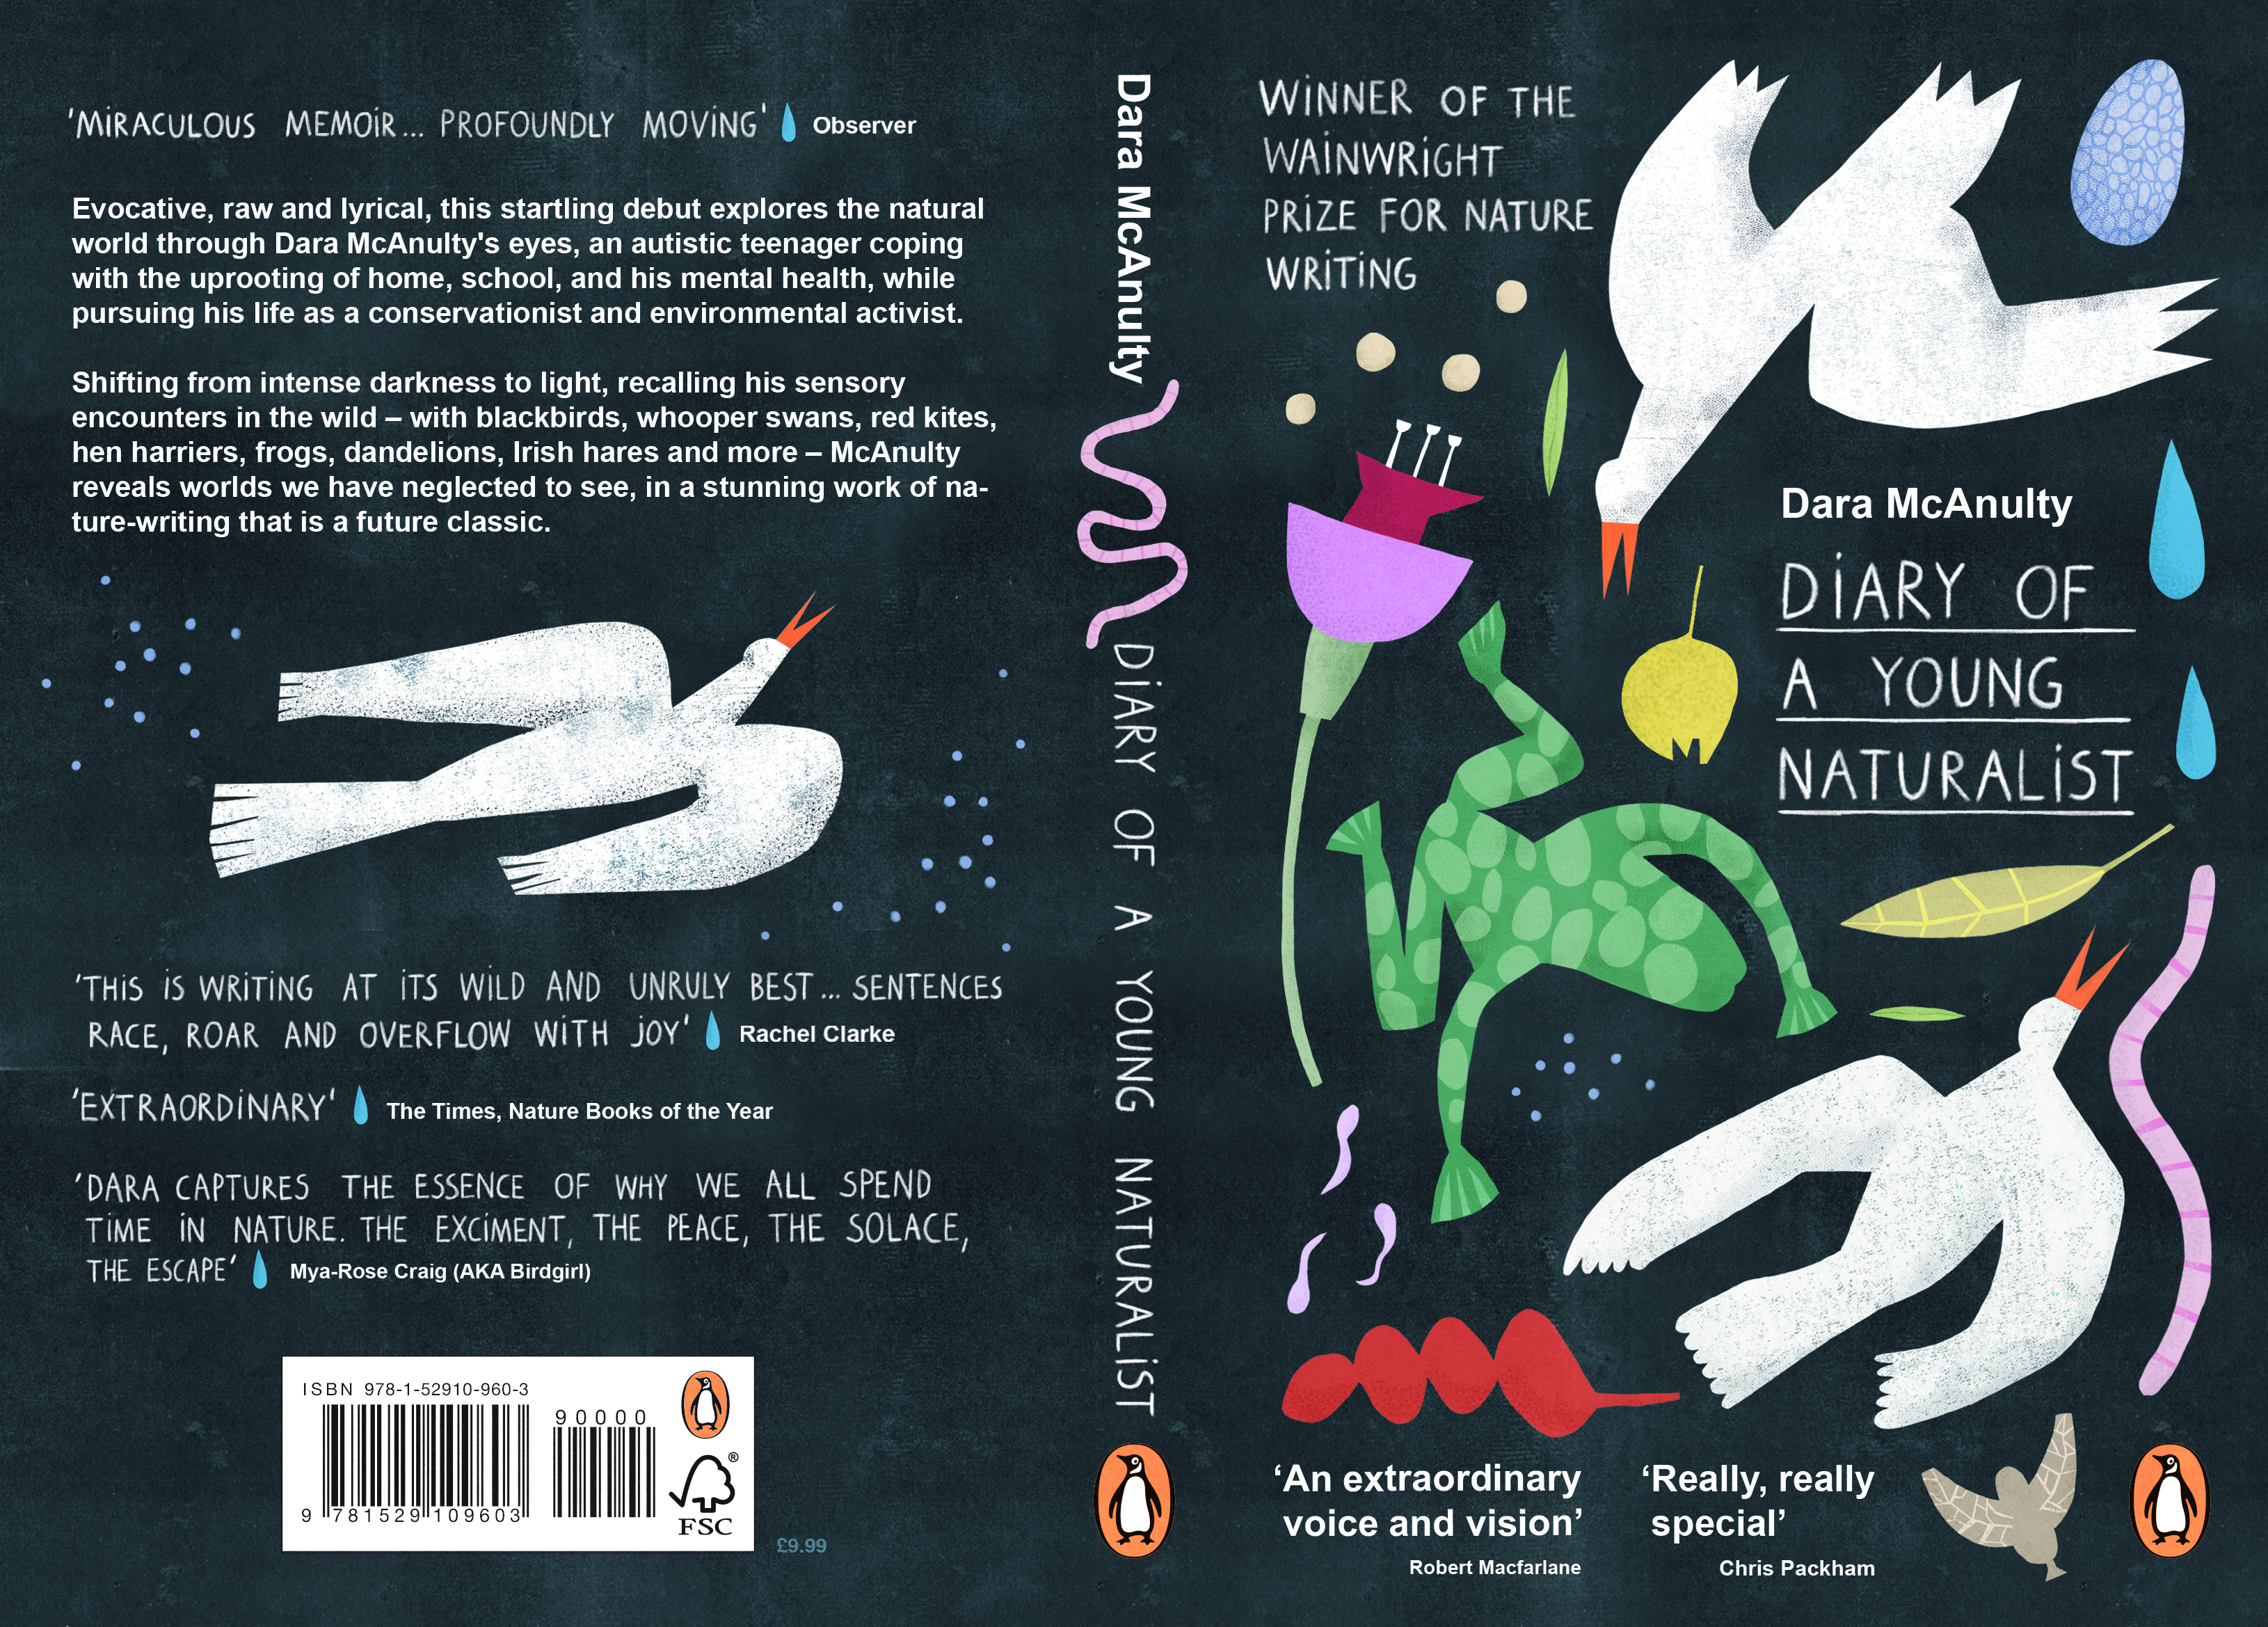 Zofia Chamienia's cover design of 'Diary of a Young Naturalist'